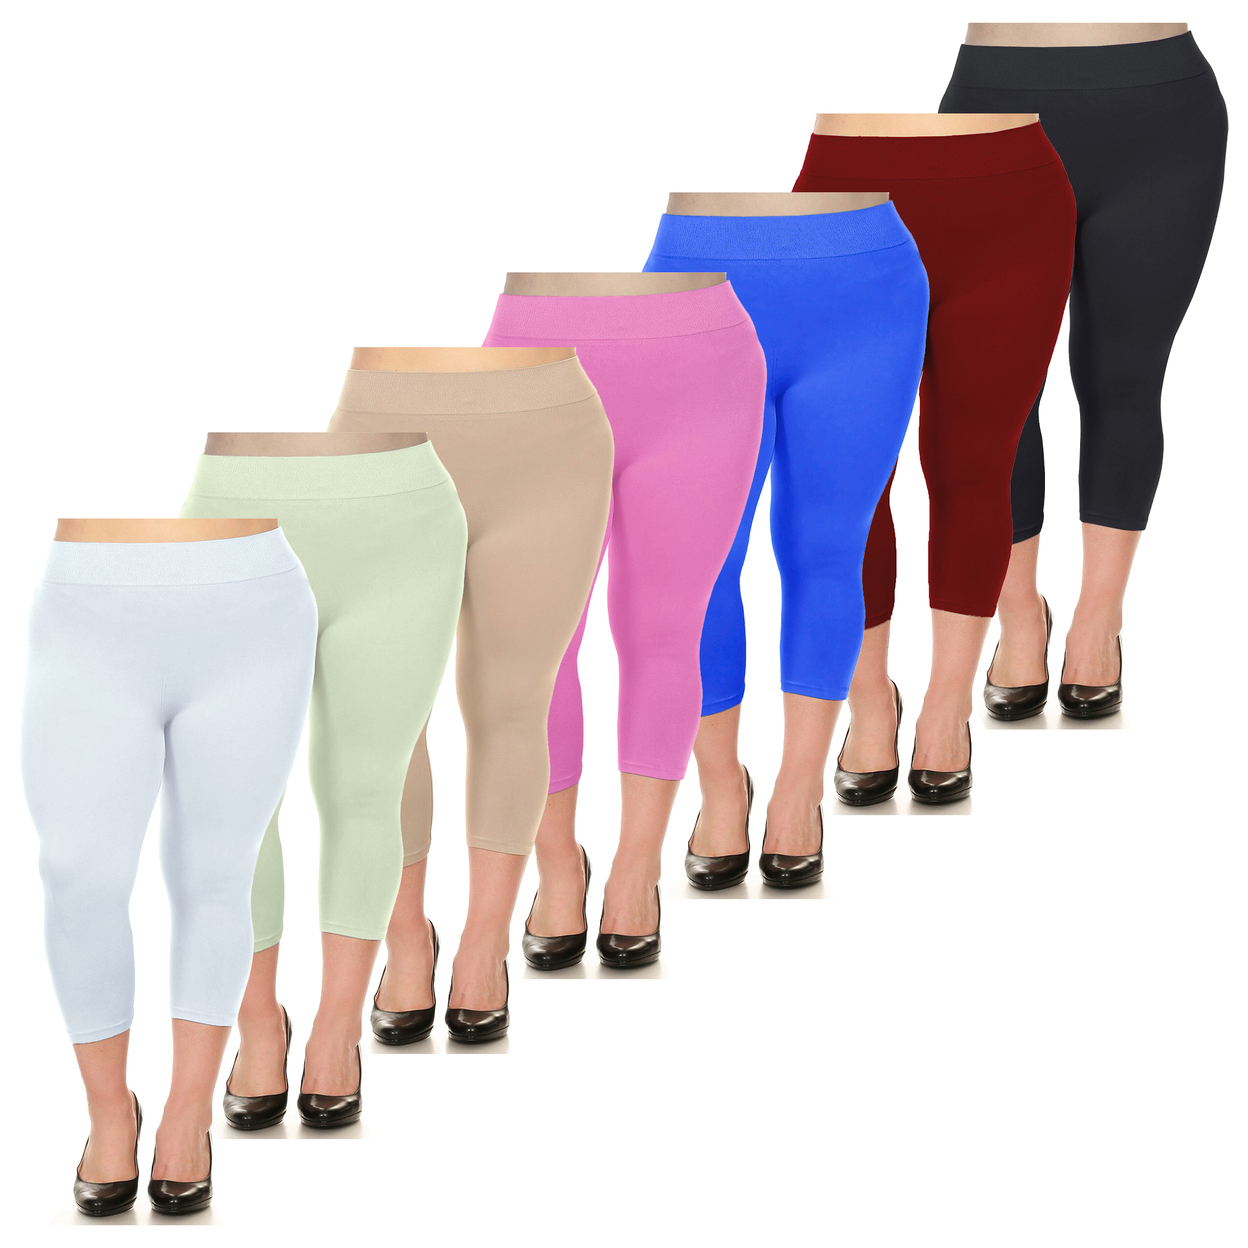 2-Pack: Women's Ultra-Soft High Waisted Smooth Stretch Active Yoga Capri Leggings Plus Size Available - Beige & Red, 1x